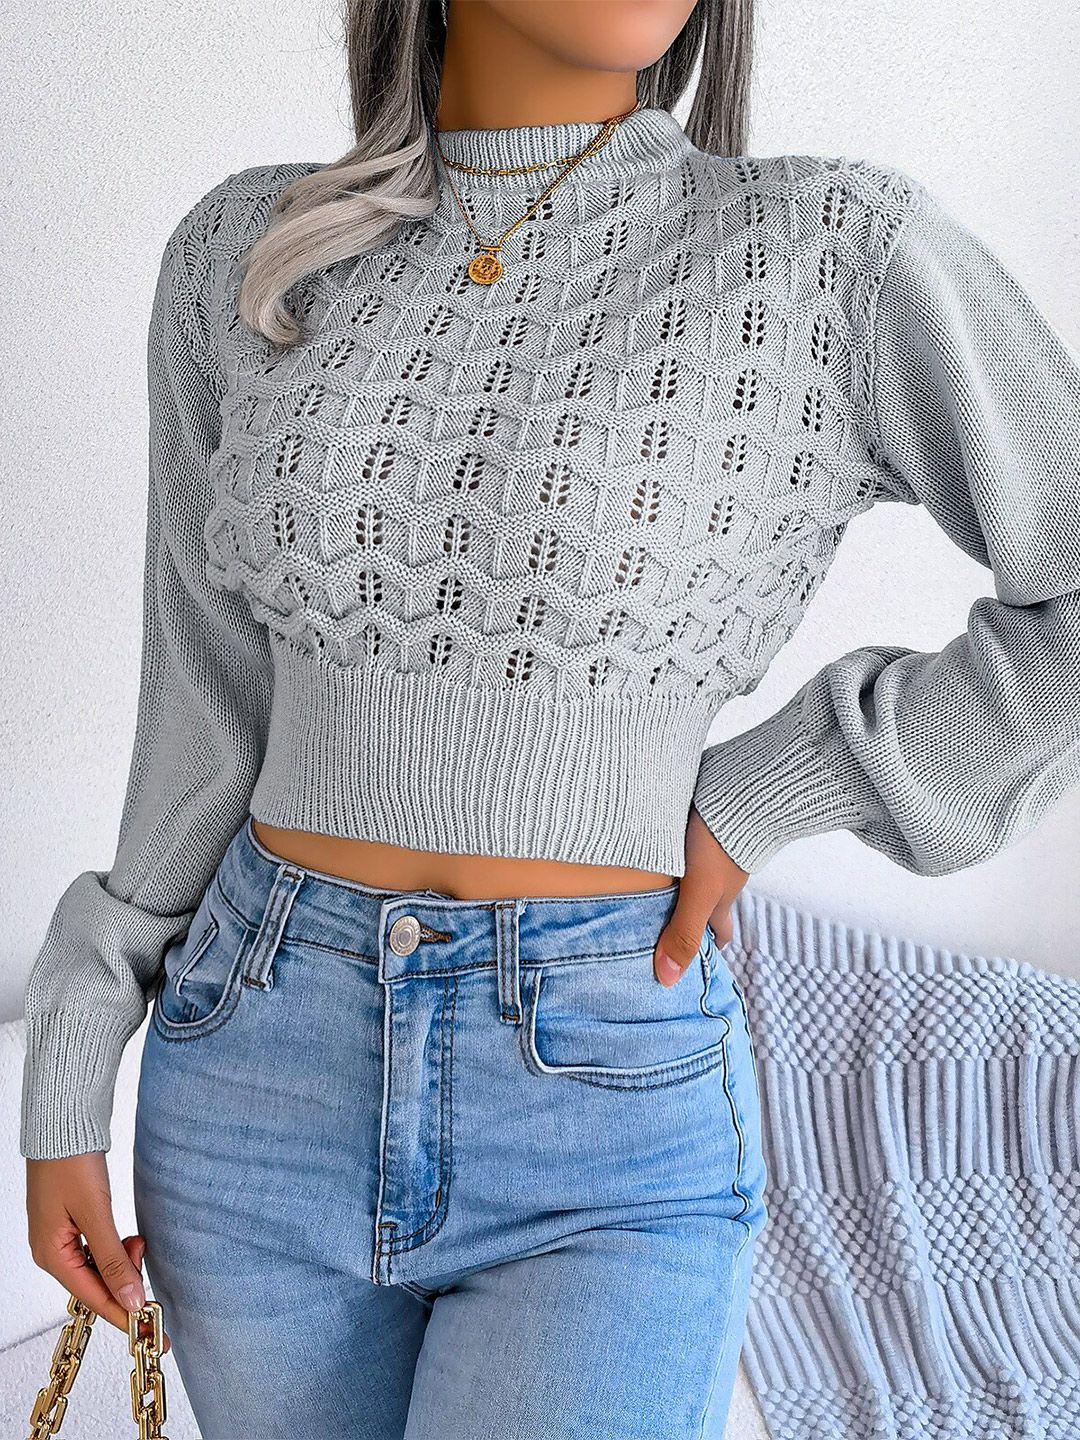 stylecast women grey cable knit crop pullover